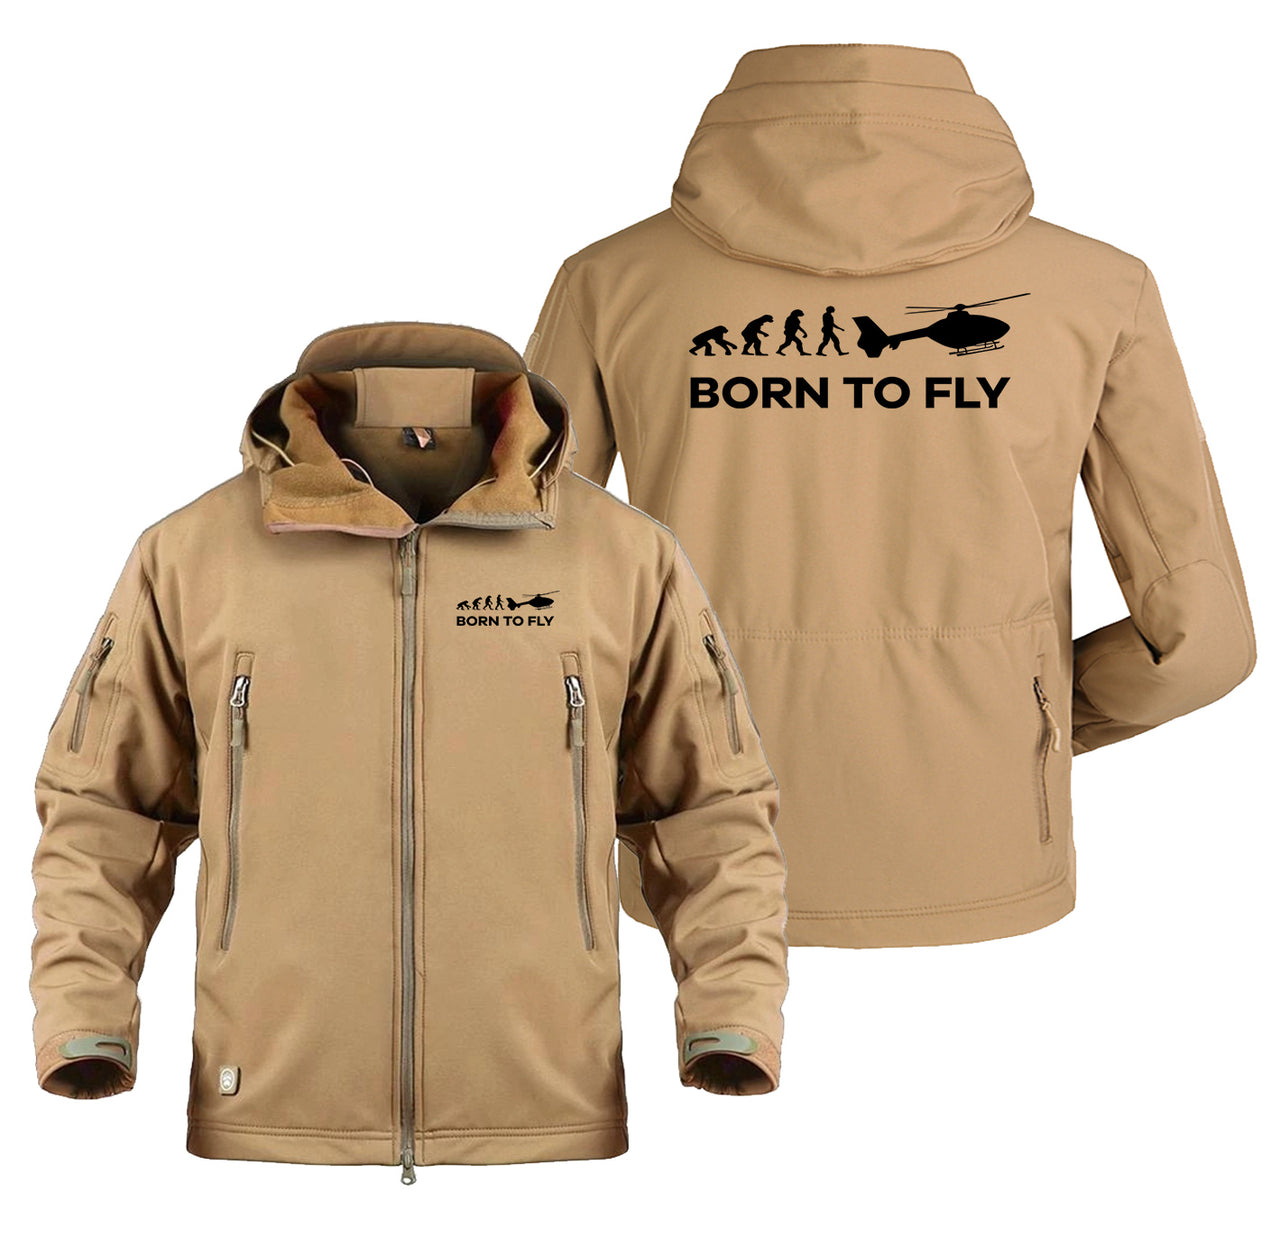 Born To Fly Helicopter Designed Military Jackets (Customizable)